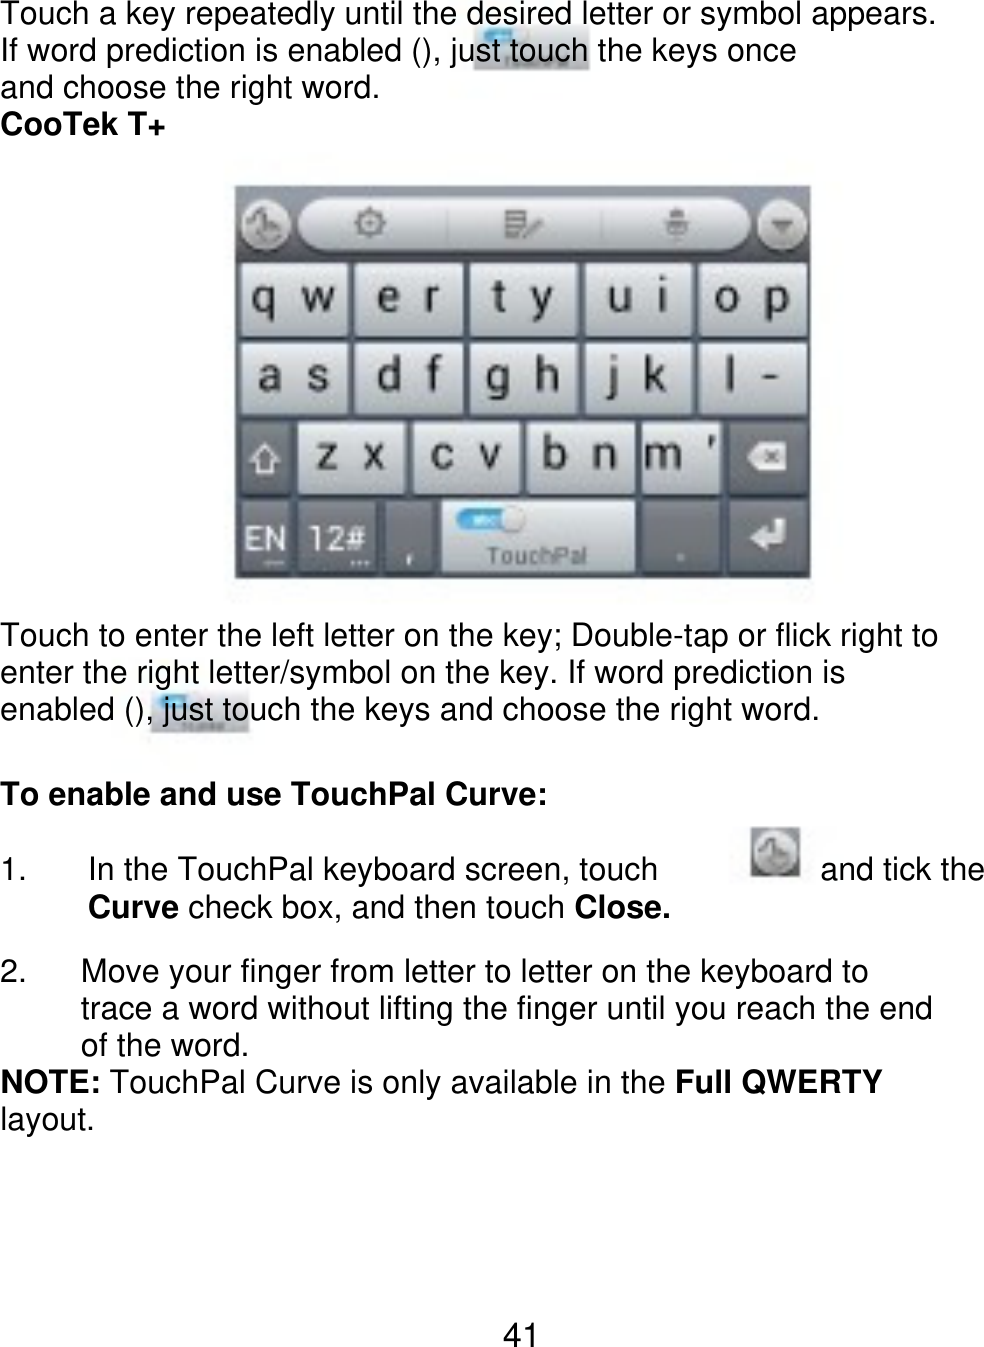 Touch a key repeatedly until the desired letter or symbol appears. If word prediction is enabled (), just touch the keys once and choose the right word. CooTek T+ Touch to enter the left letter on the key; Double-tap or flick right to enter the right letter/symbol on the key. If word prediction is enabled (), just touch the keys and choose the right word. To enable and use TouchPal Curve: 1. 2. In the TouchPal keyboard screen, touch Curve check box, and then touch Close. and tick the      Move your finger from letter to letter on the keyboard to      trace a word without lifting the finger until you reach the end      of the word. NOTE: TouchPal Curve is only available in the Full QWERTY layout. 41 